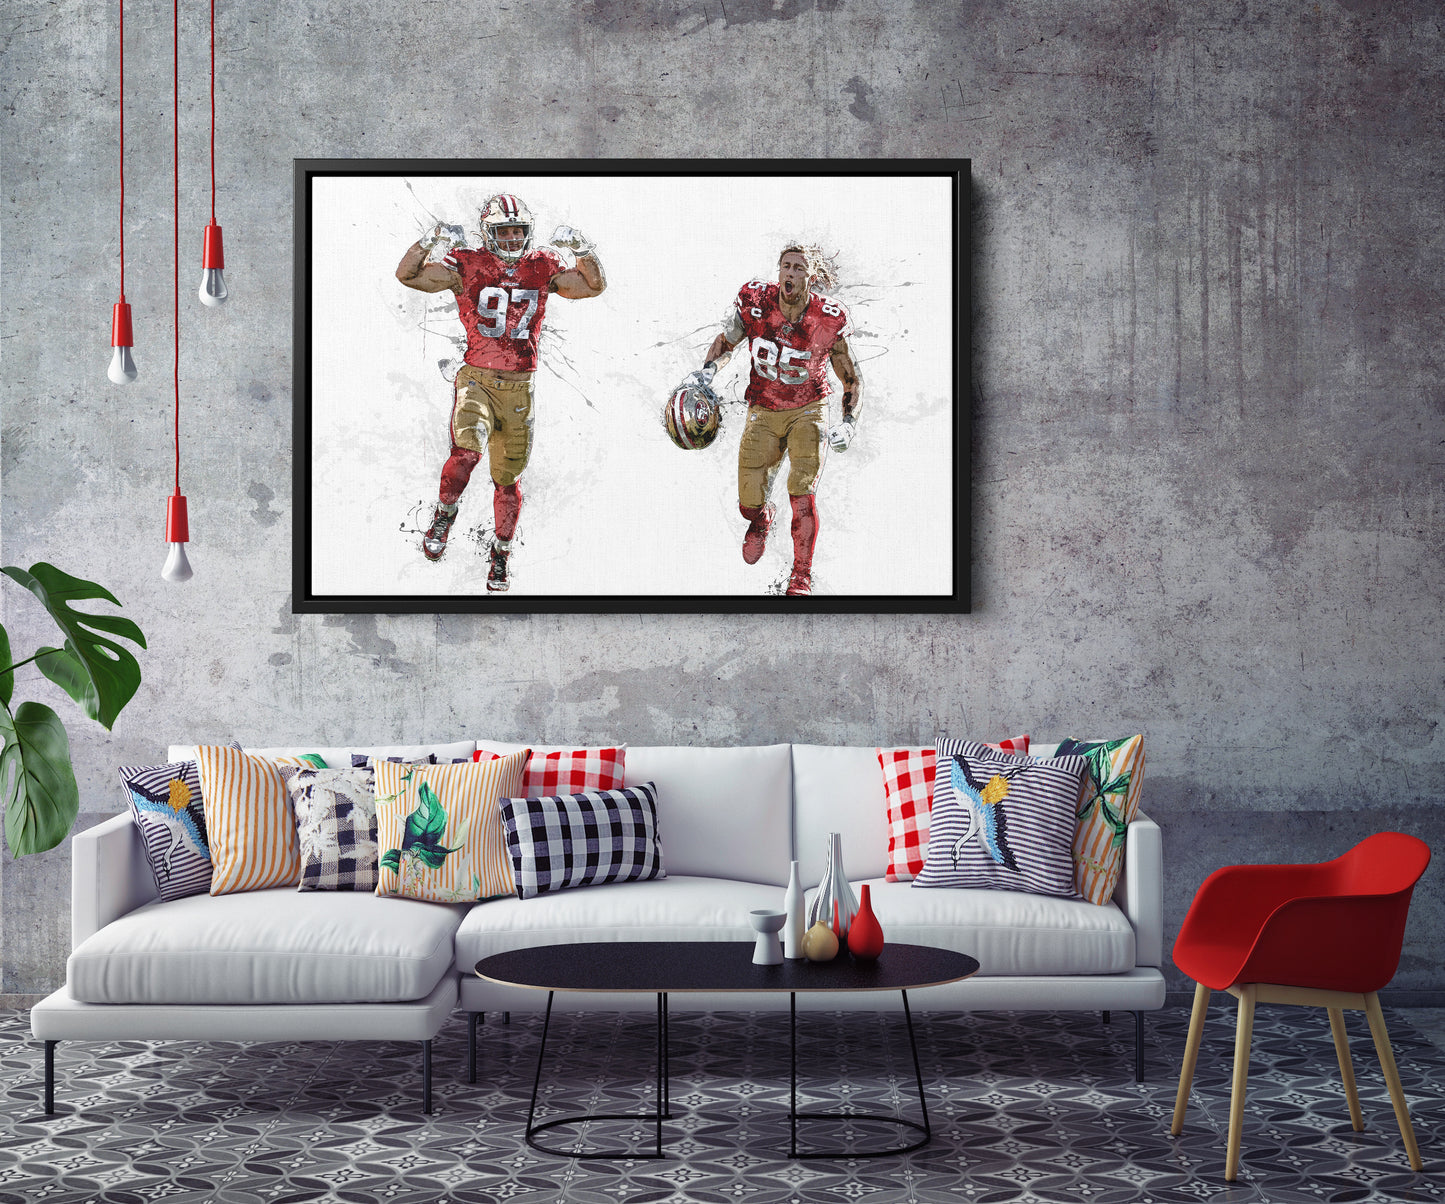 Nick Bosa George Kittle Poster San Fransisco 49ers Football Painting Hand Made Posters Canvas Print Wall Kids Art Man Cave Gift Home Decor